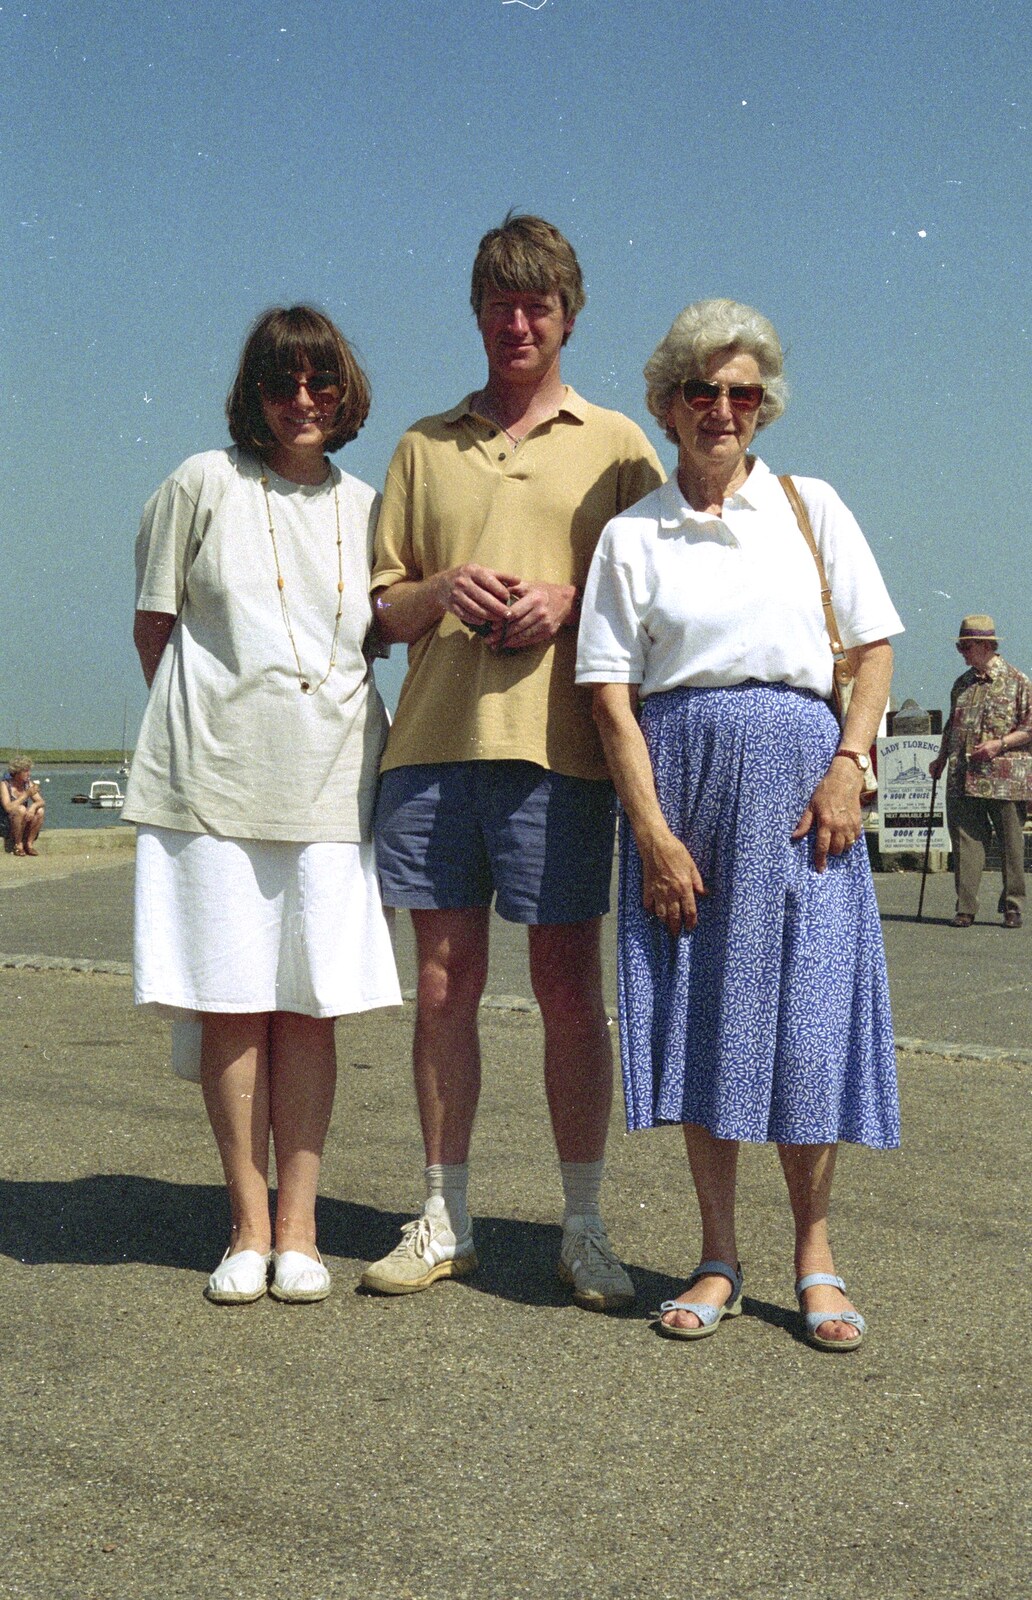 Grandmother, Neil and Caroline Visit, Brome and Orford, Suffolk - 24th July 1995: Caroline, Neil and Grandmother on Orford Quay